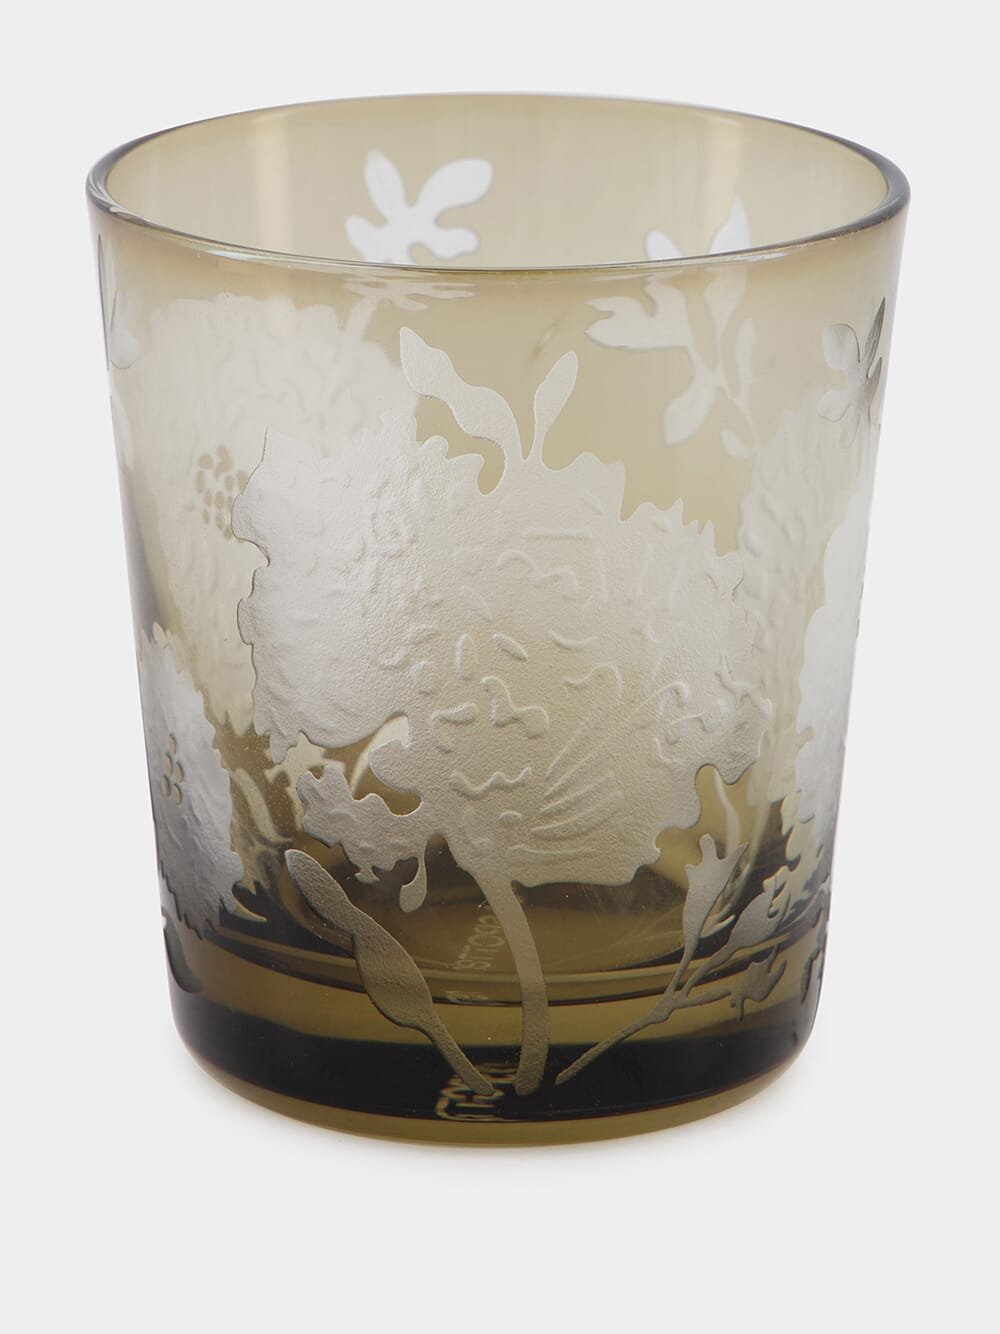 Pols PottenSet of 6 Peony Tumblers Glasses at Fashion Clinic